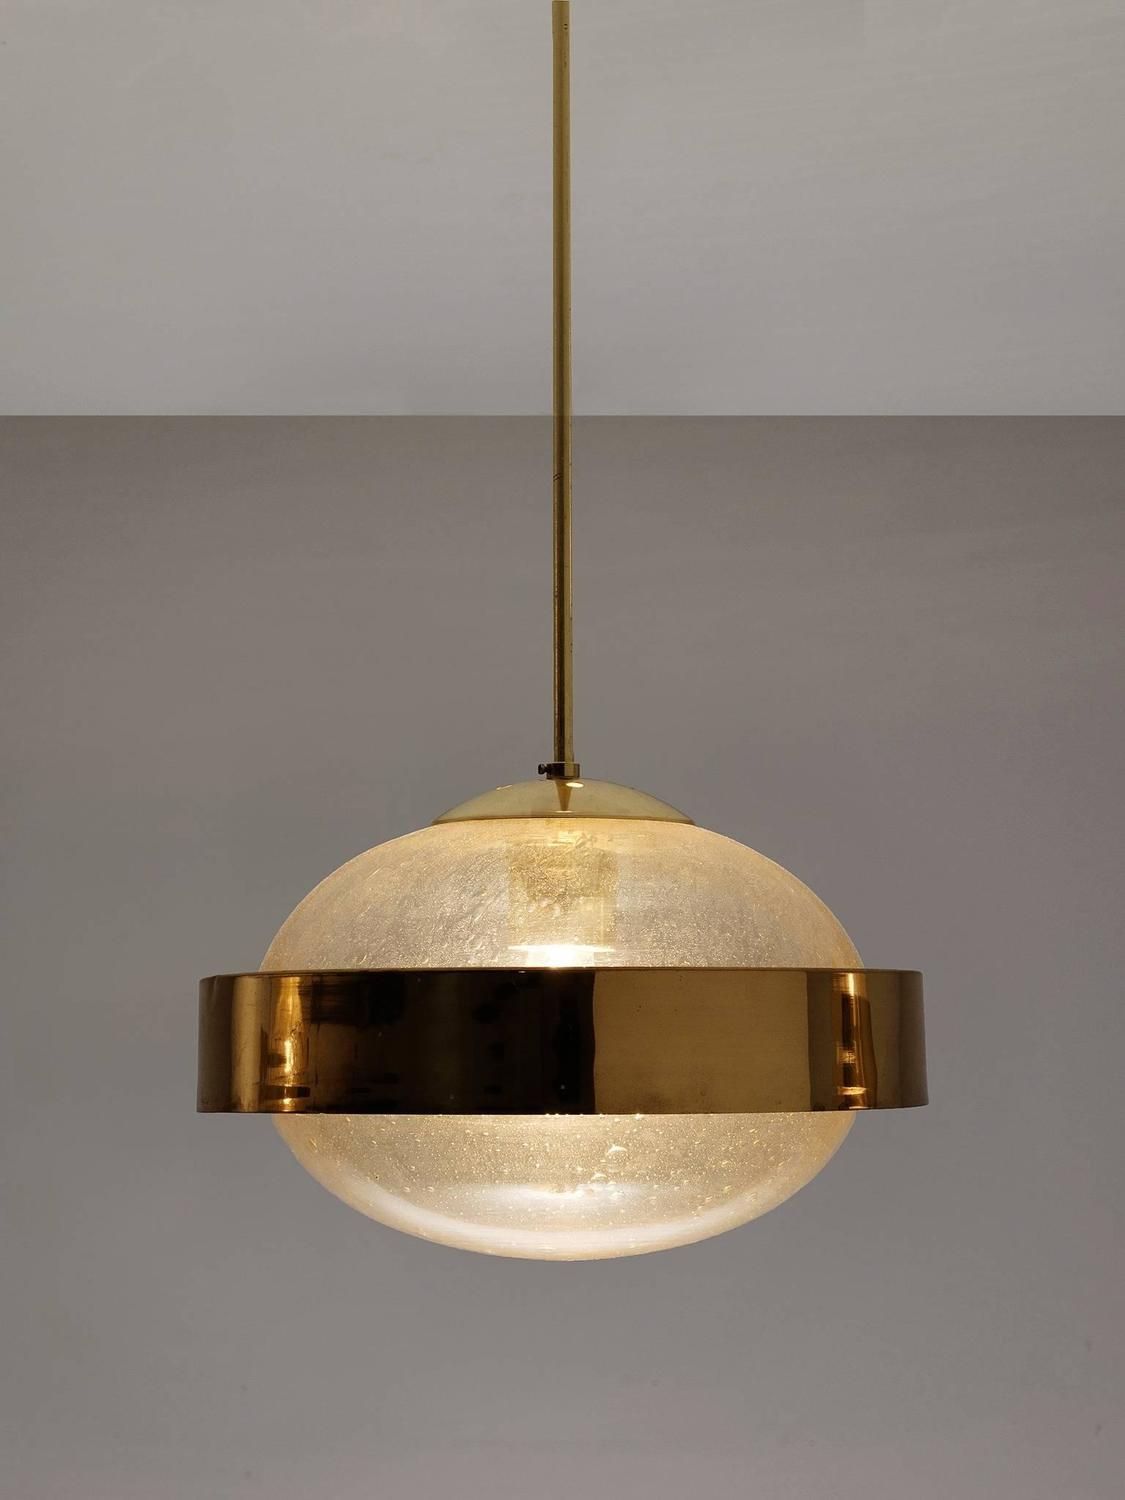 Set Of Three Pendants In Brass And Glass | Lampen, Lamps Within Radtke 3 Light Single Drum Pendants (View 23 of 30)